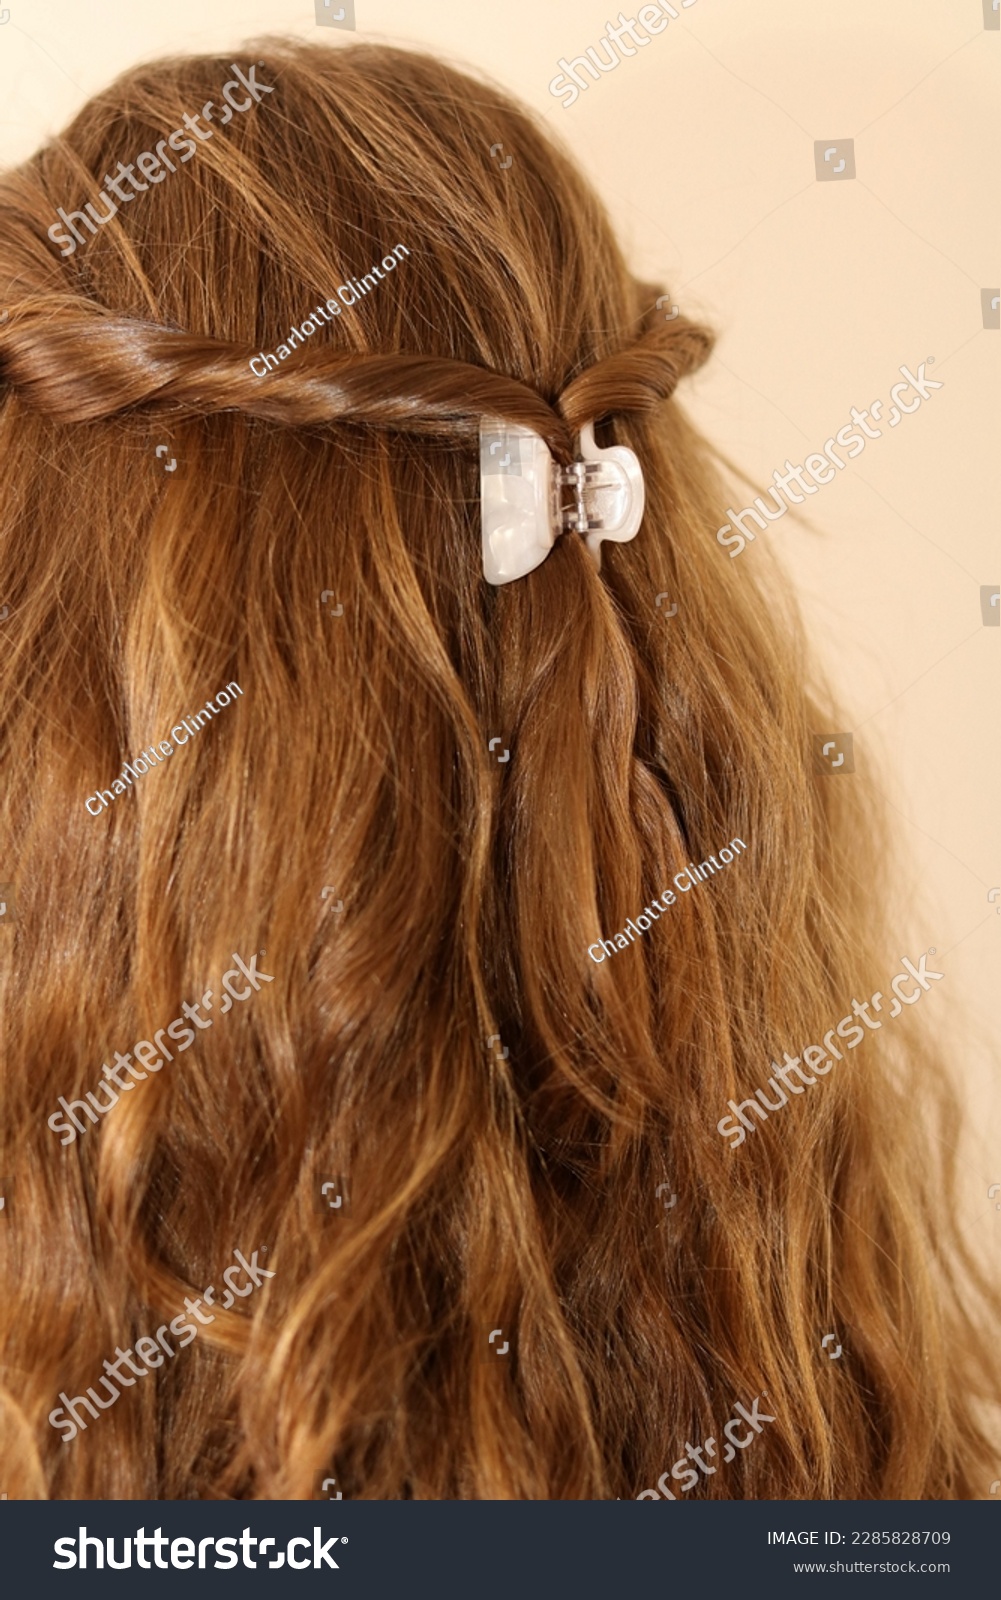 Dark blonde hair twisted back and clasped in a claw clip. Pearlescent hair clip. Trendy hairstyle. Boho hairstyle. Healthy, shiny hair.  #2285828709